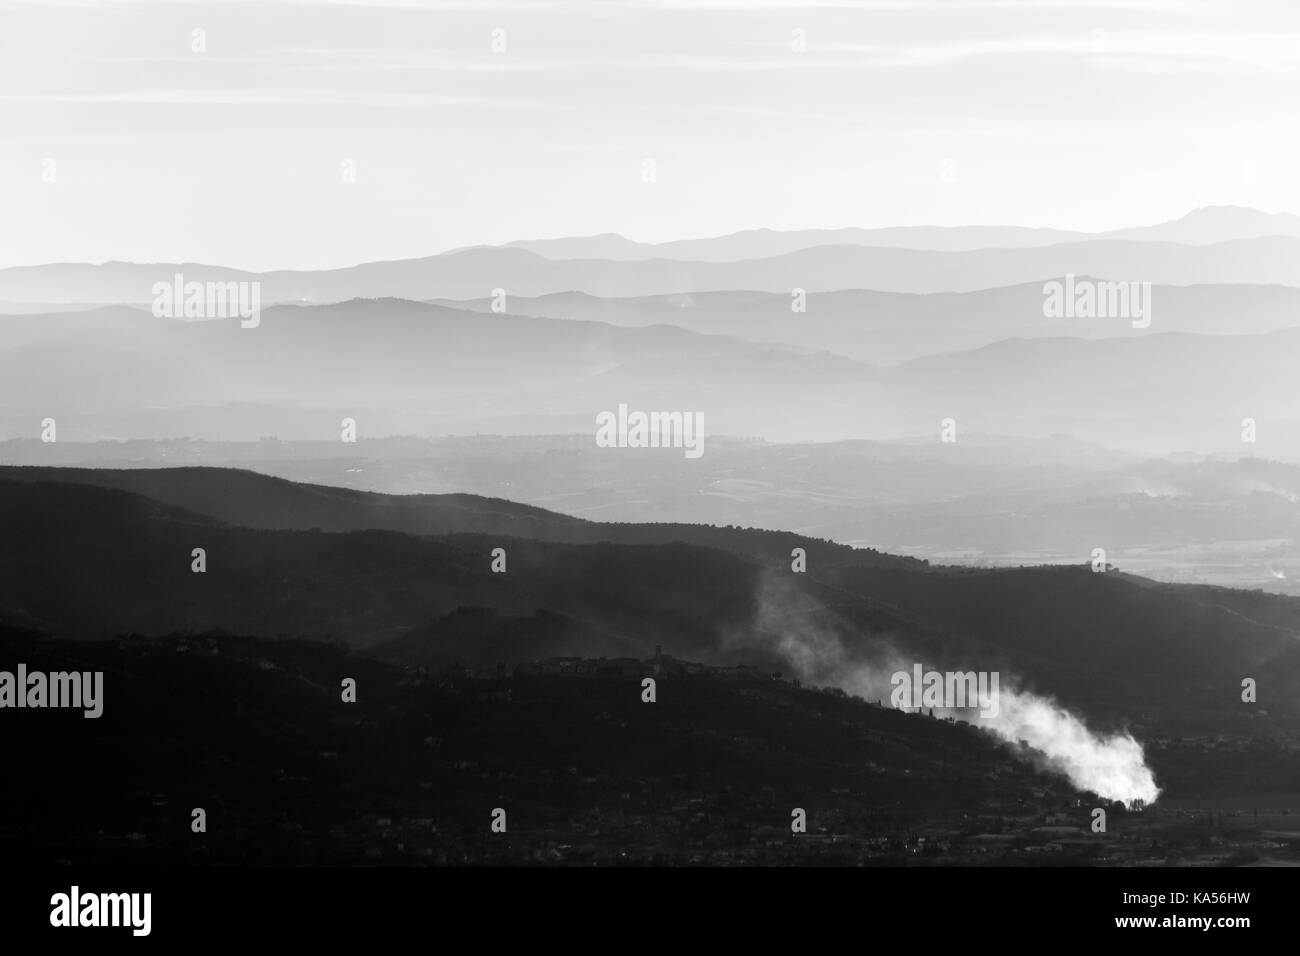 Valley filled by mist, with smoke in the foreground and distant mountains and hills in the background Stock Photo